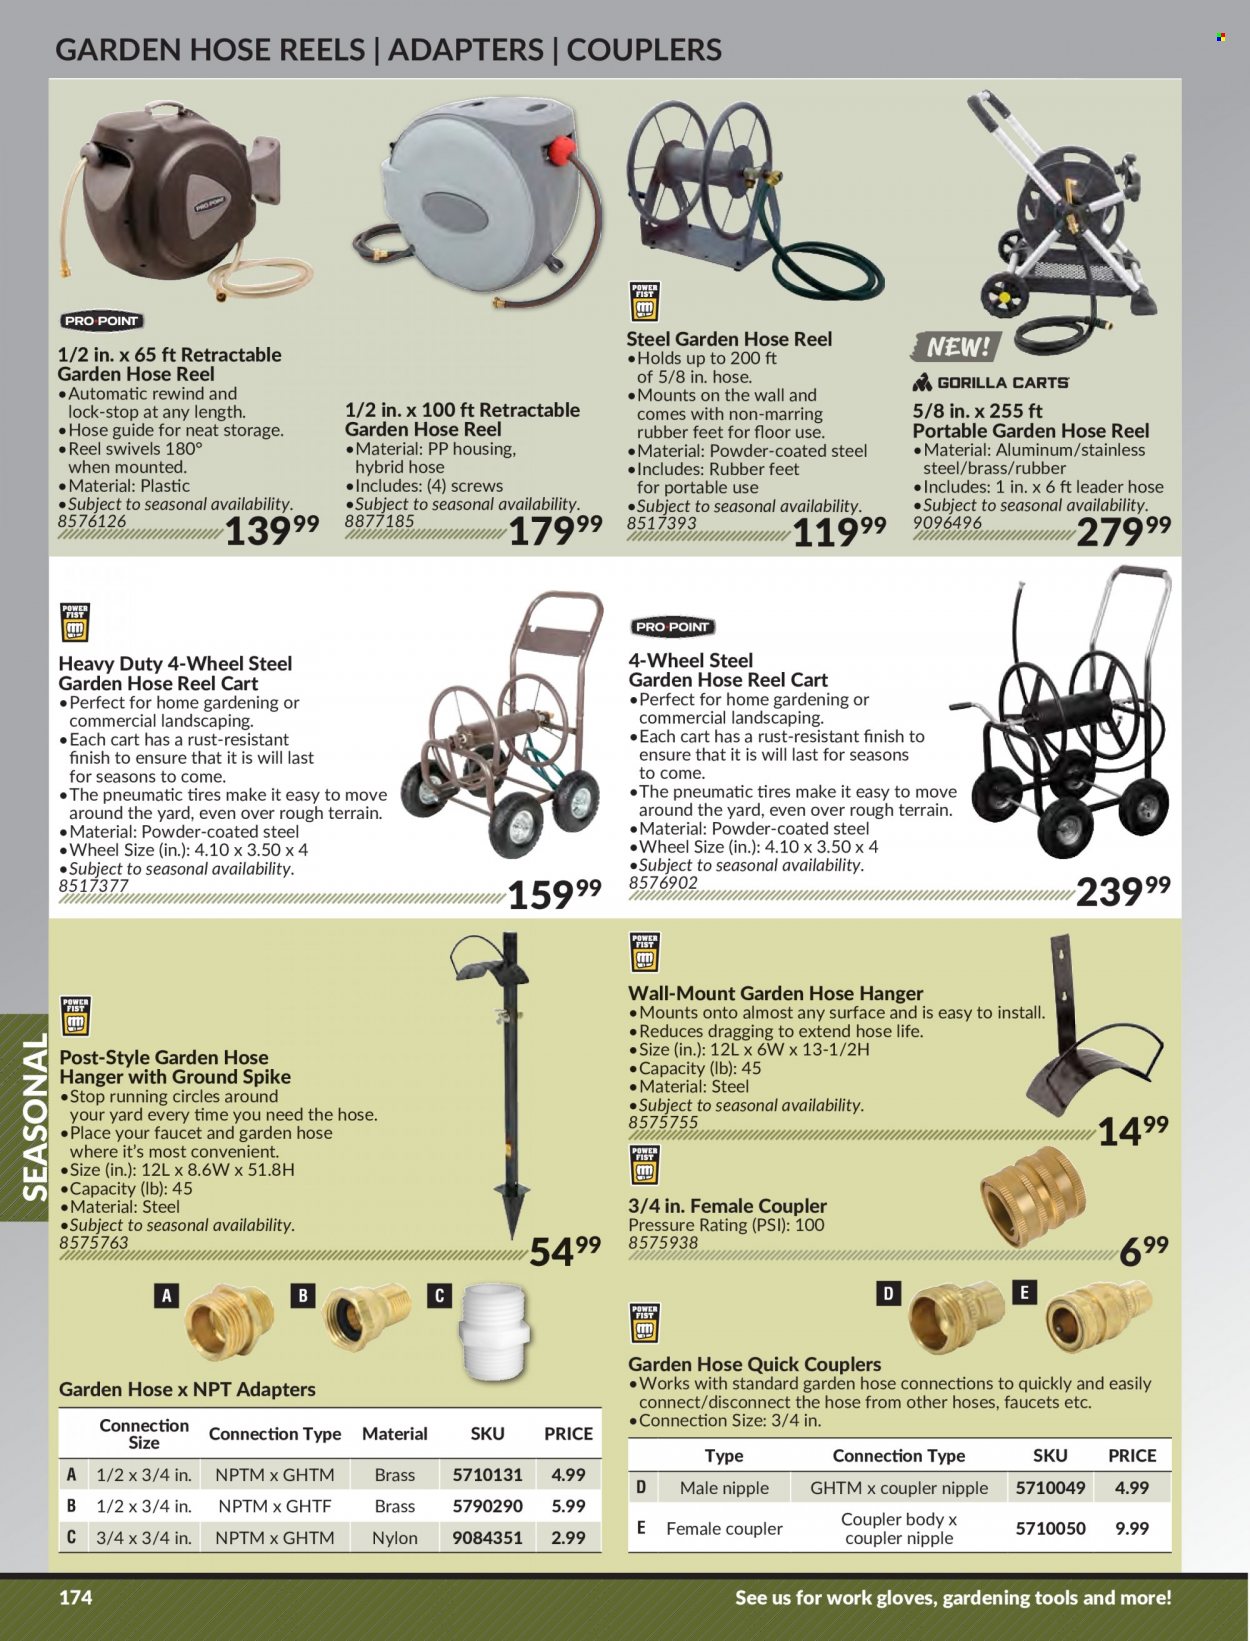 thumbnail - Princess Auto Flyer - Sales products - faucet, gardening tools, work gloves, cart, hose reel, garden hose, tires. Page 180.